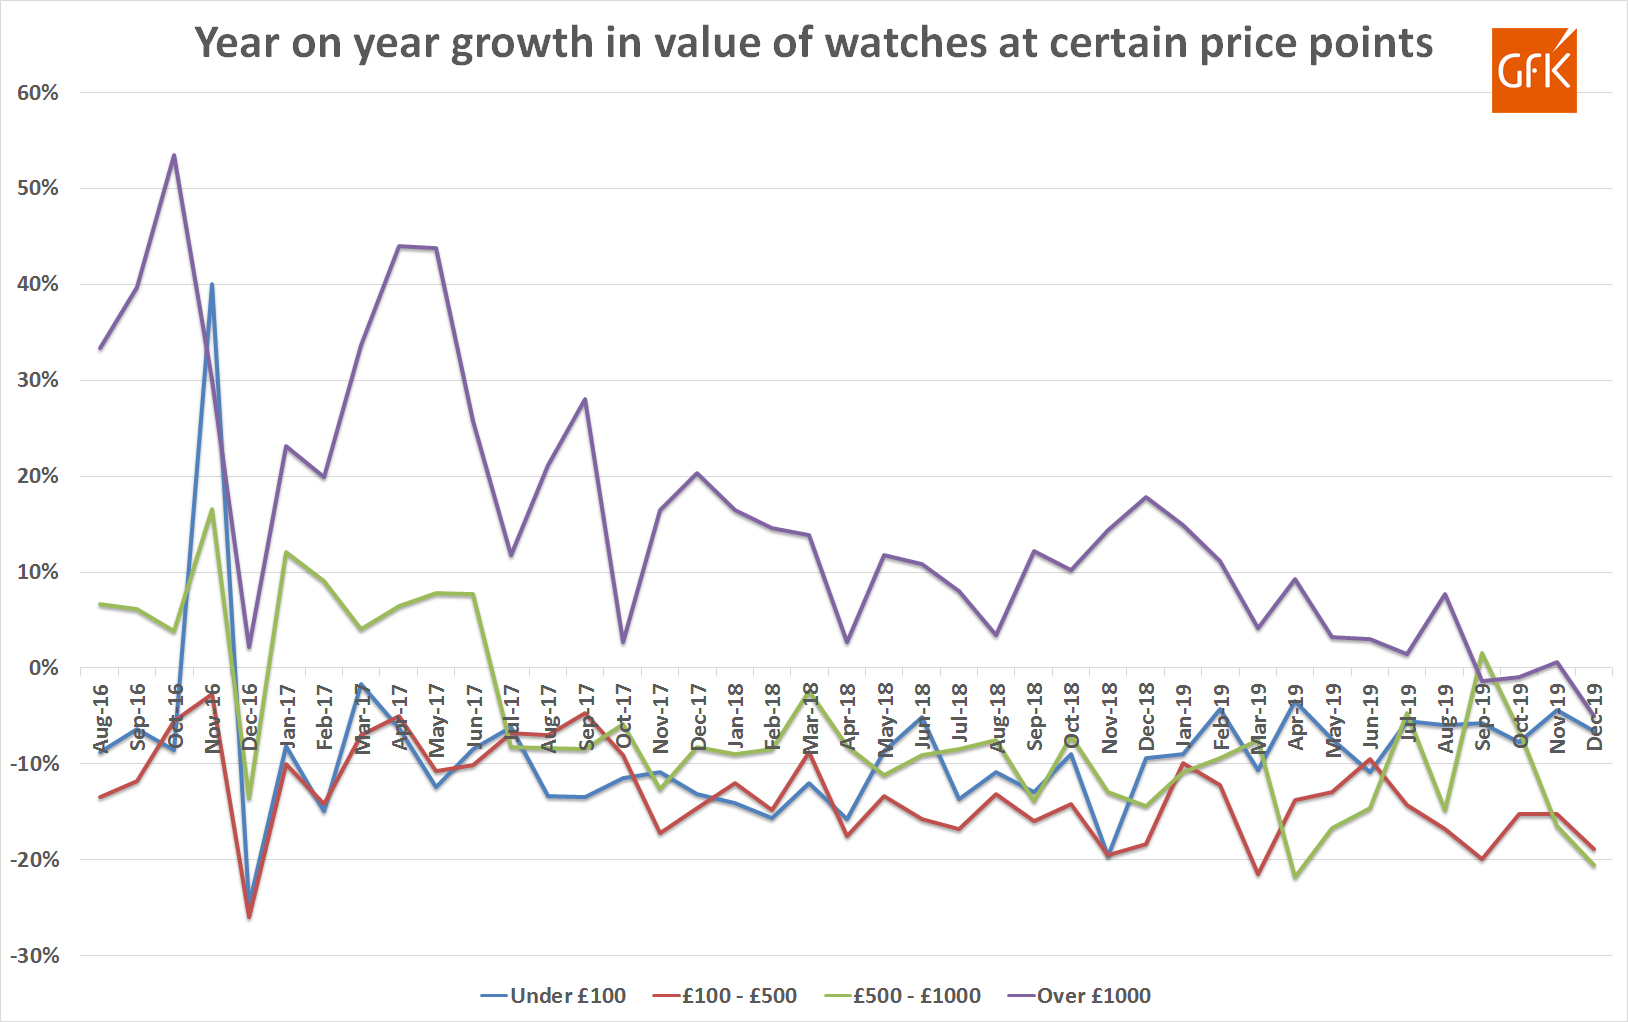 Gfk trends for watch sales by price point